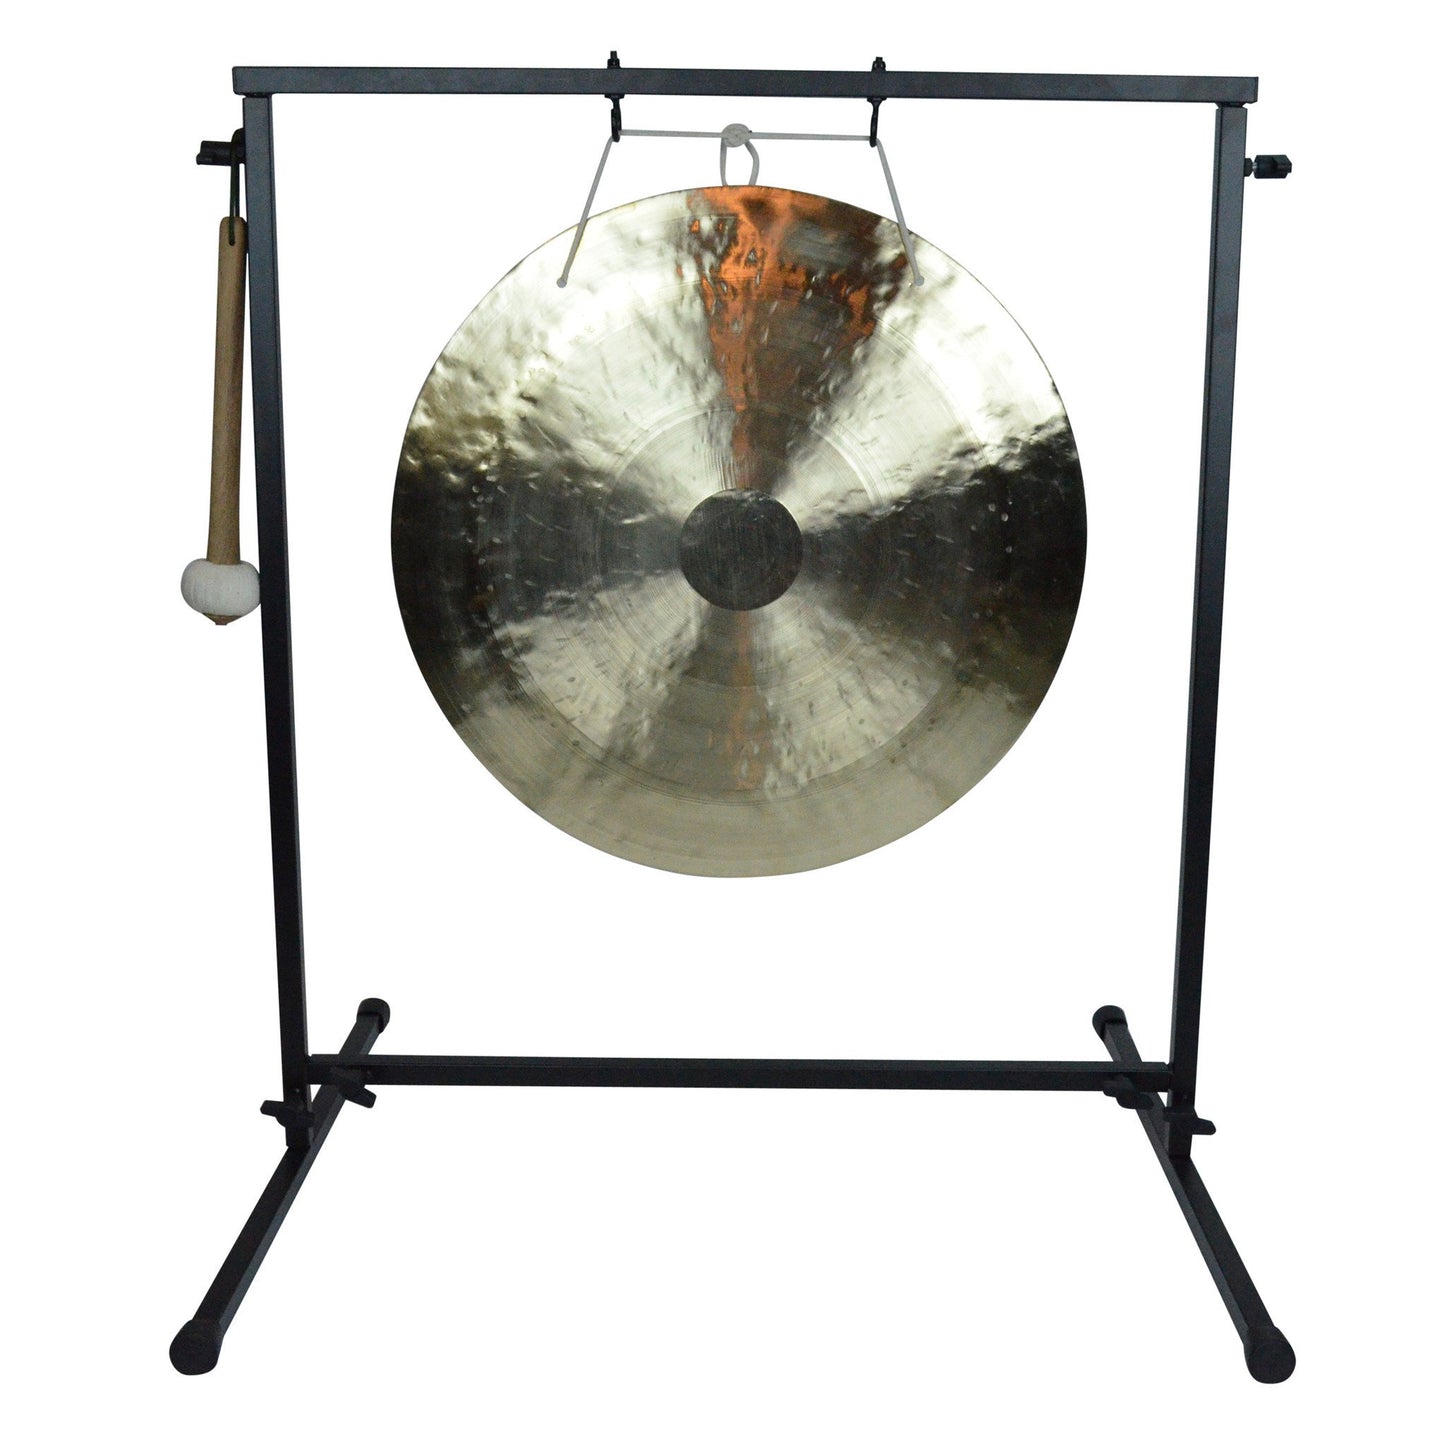 22" Wind Gong on Chronos Metal Gong Stand with Mallet